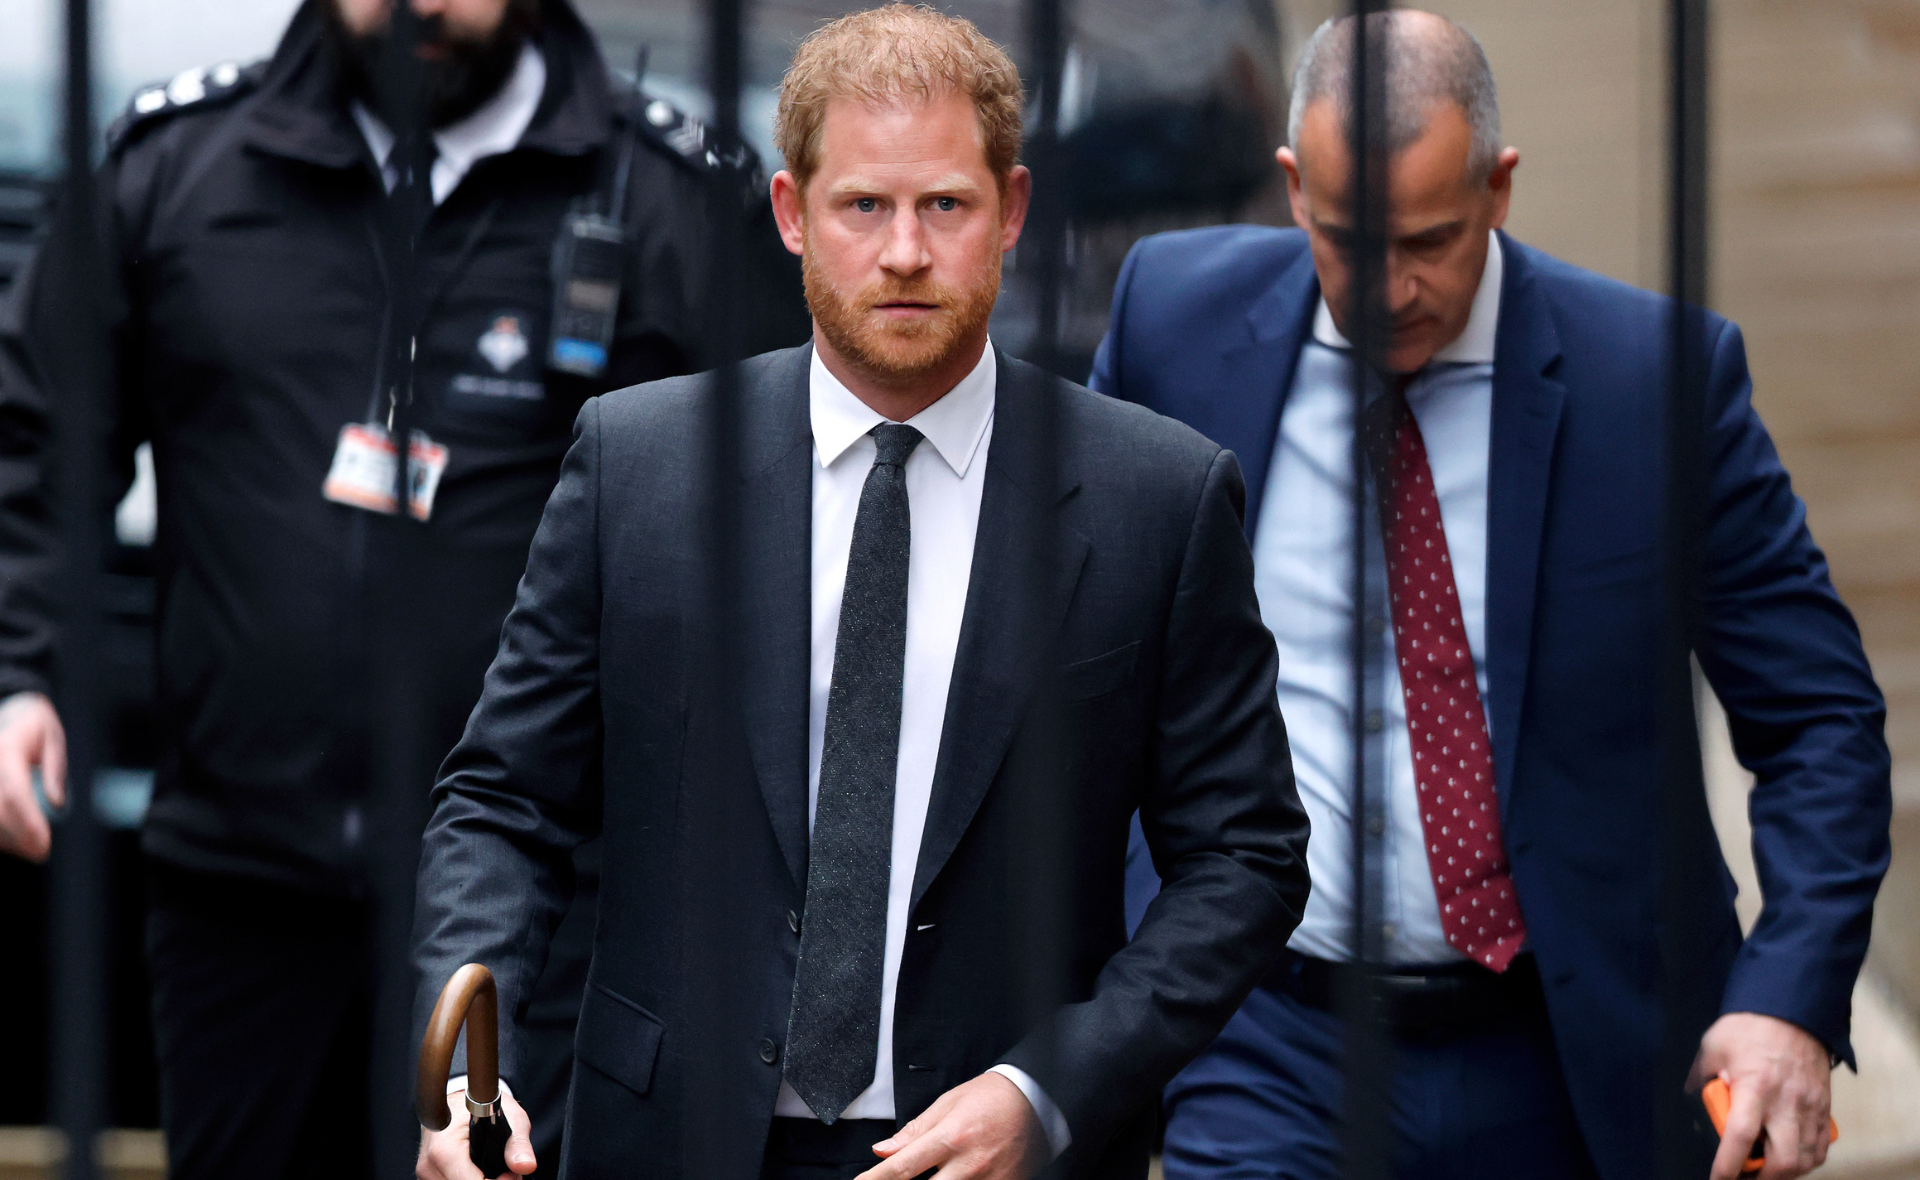 EXCLUSIVE: Royal rumble as Prince Harry and celebs battle Daily Mail in High Court